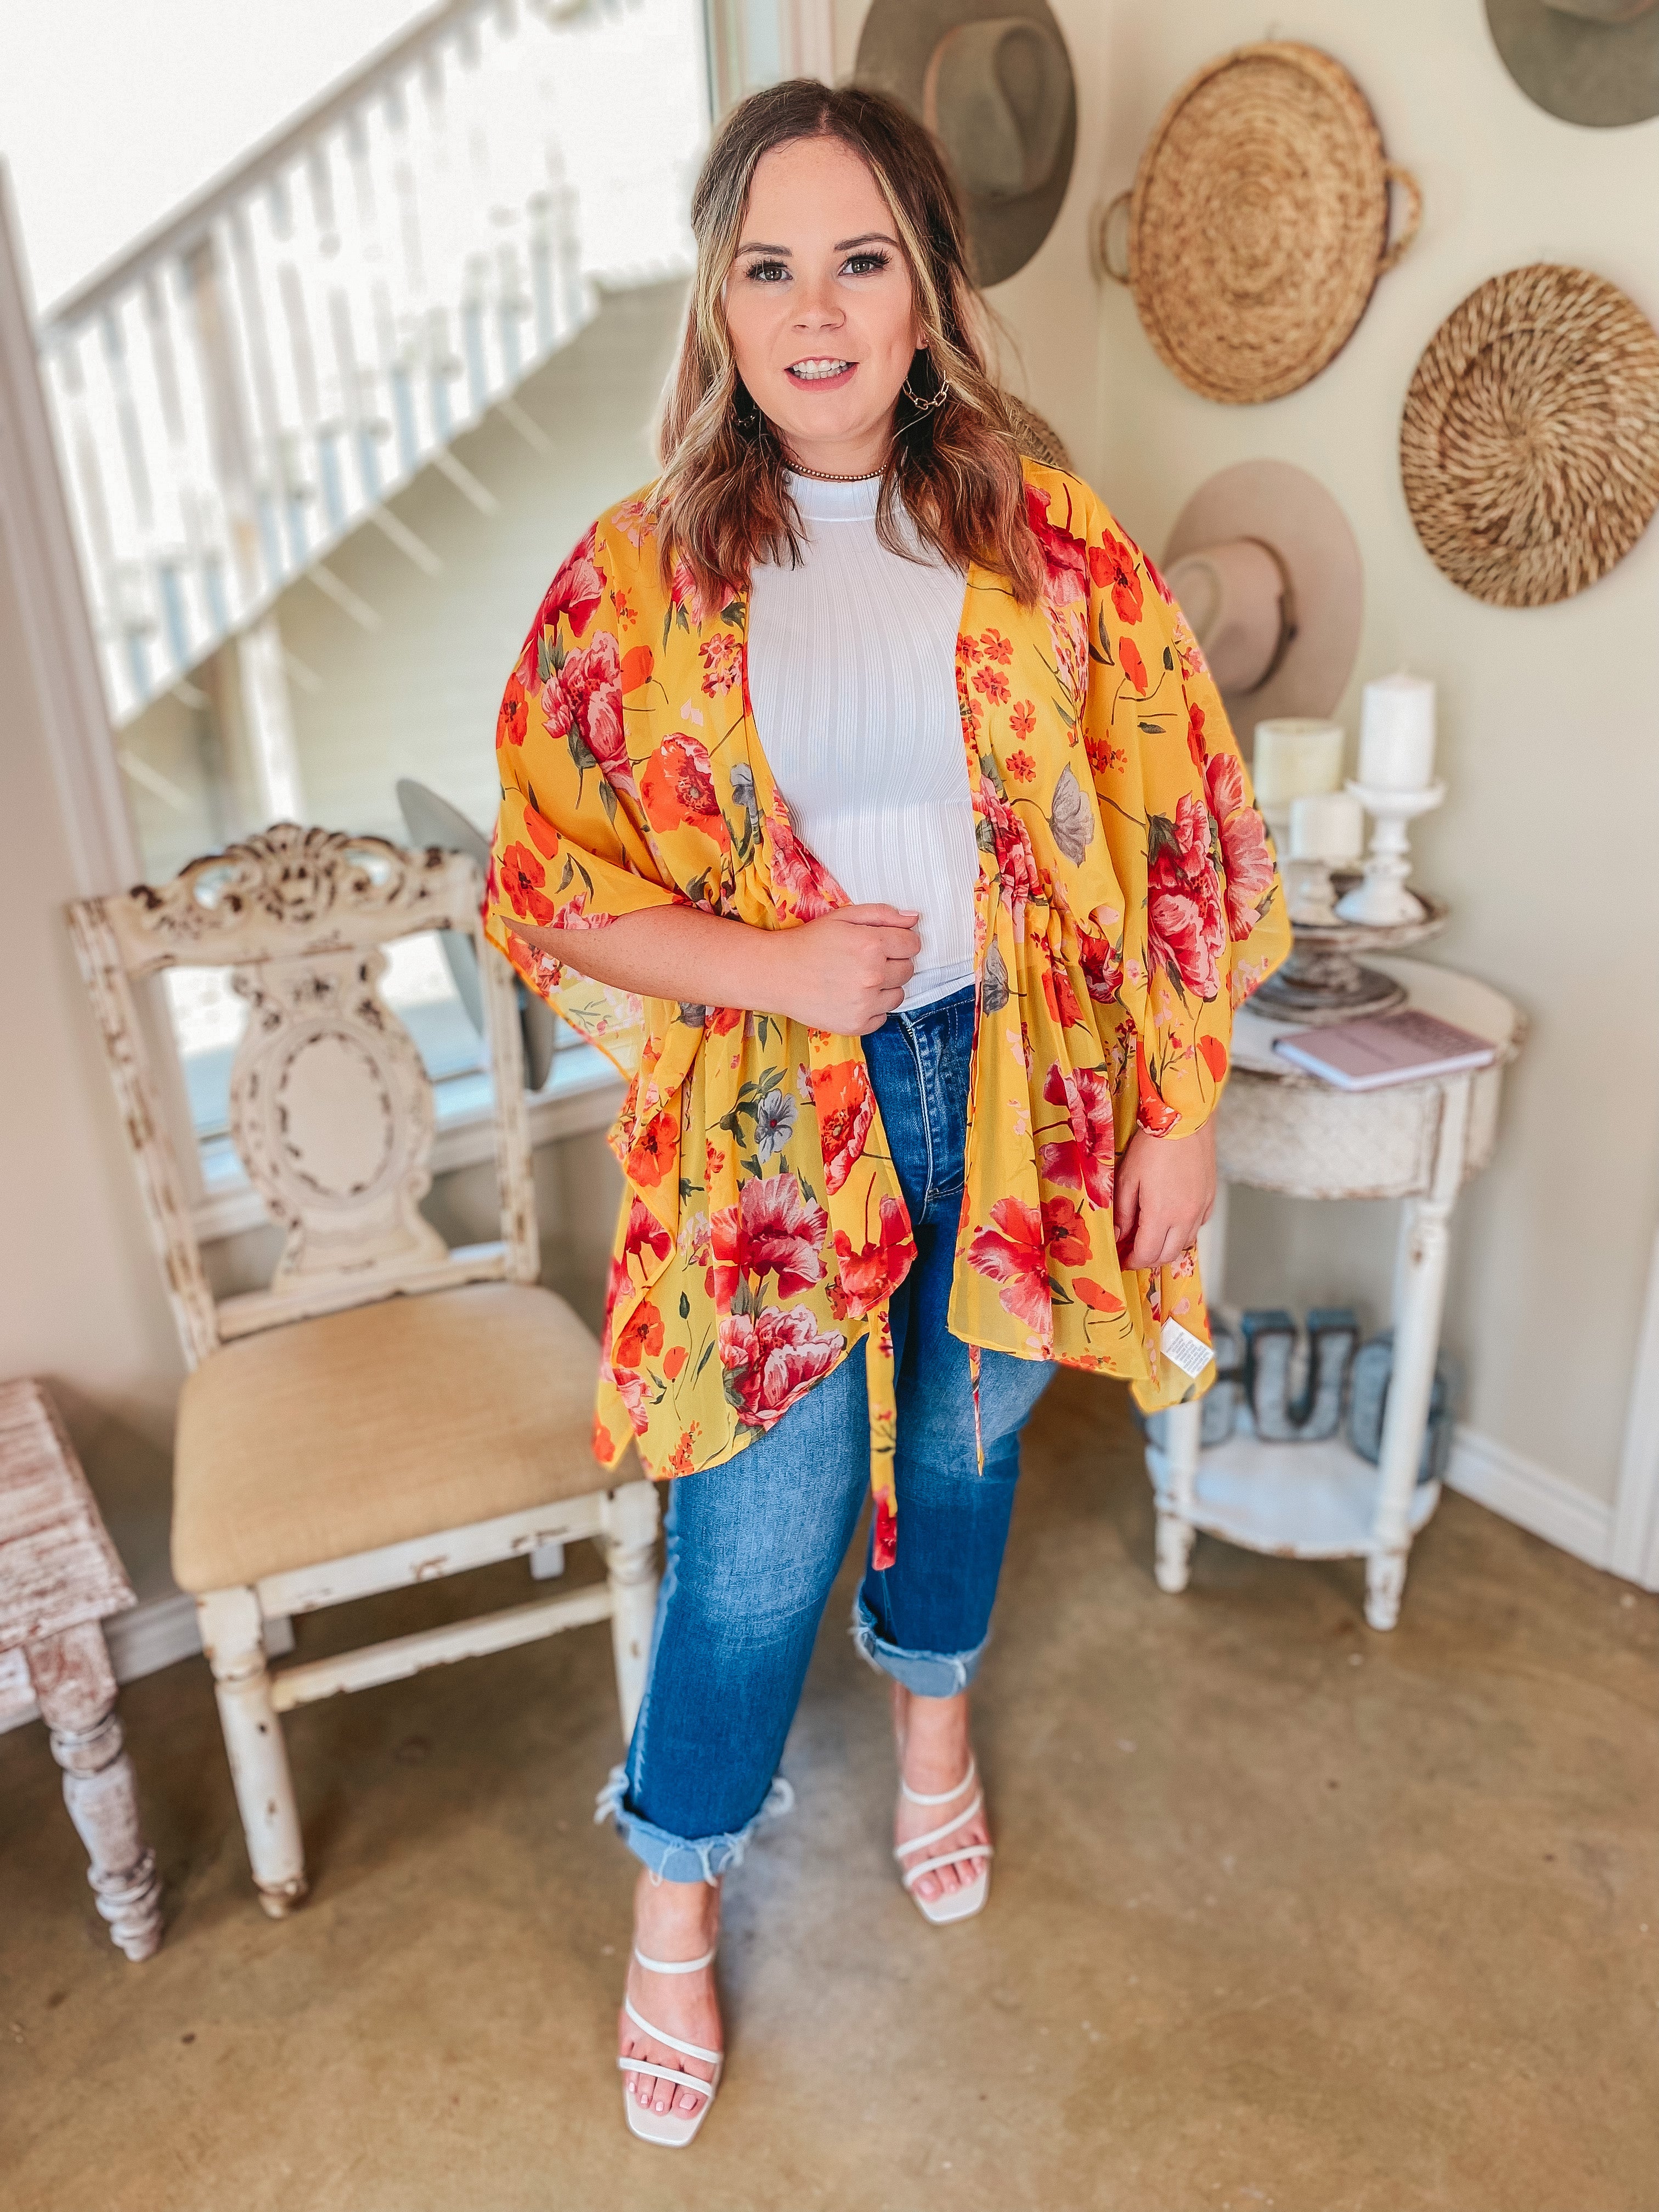 Tied Together with a Smile Waist Tie Closure Floral Drape Kimono in Yellow - Giddy Up Glamour Boutique